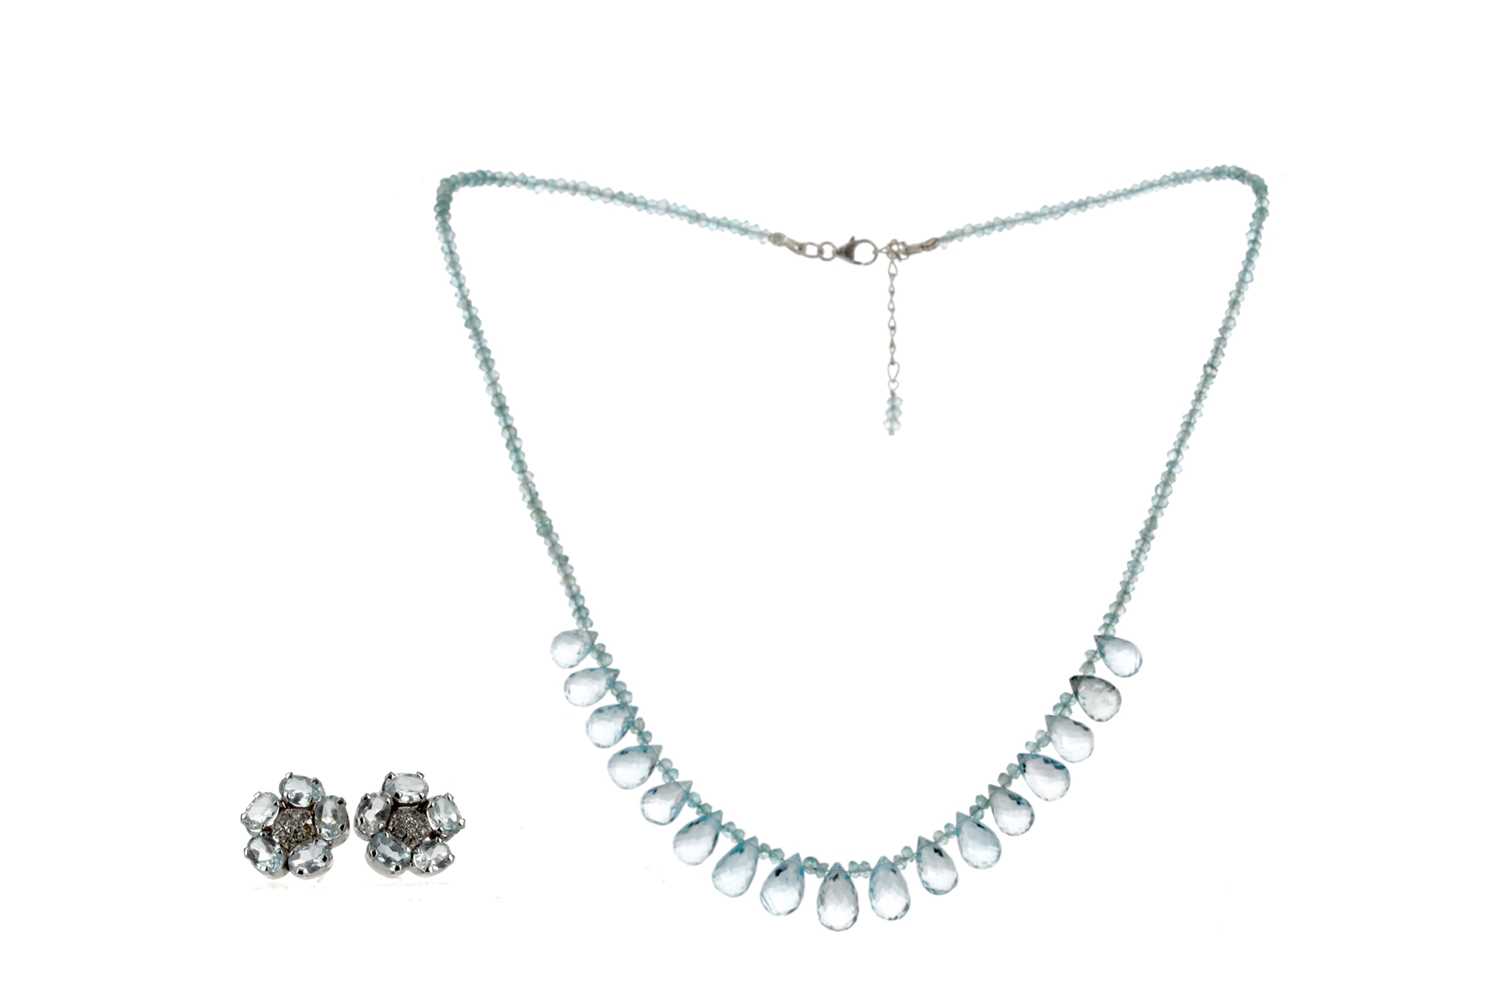 Lot 425 - A BLUE TOPAZ NECKLACE AND EARRINGS